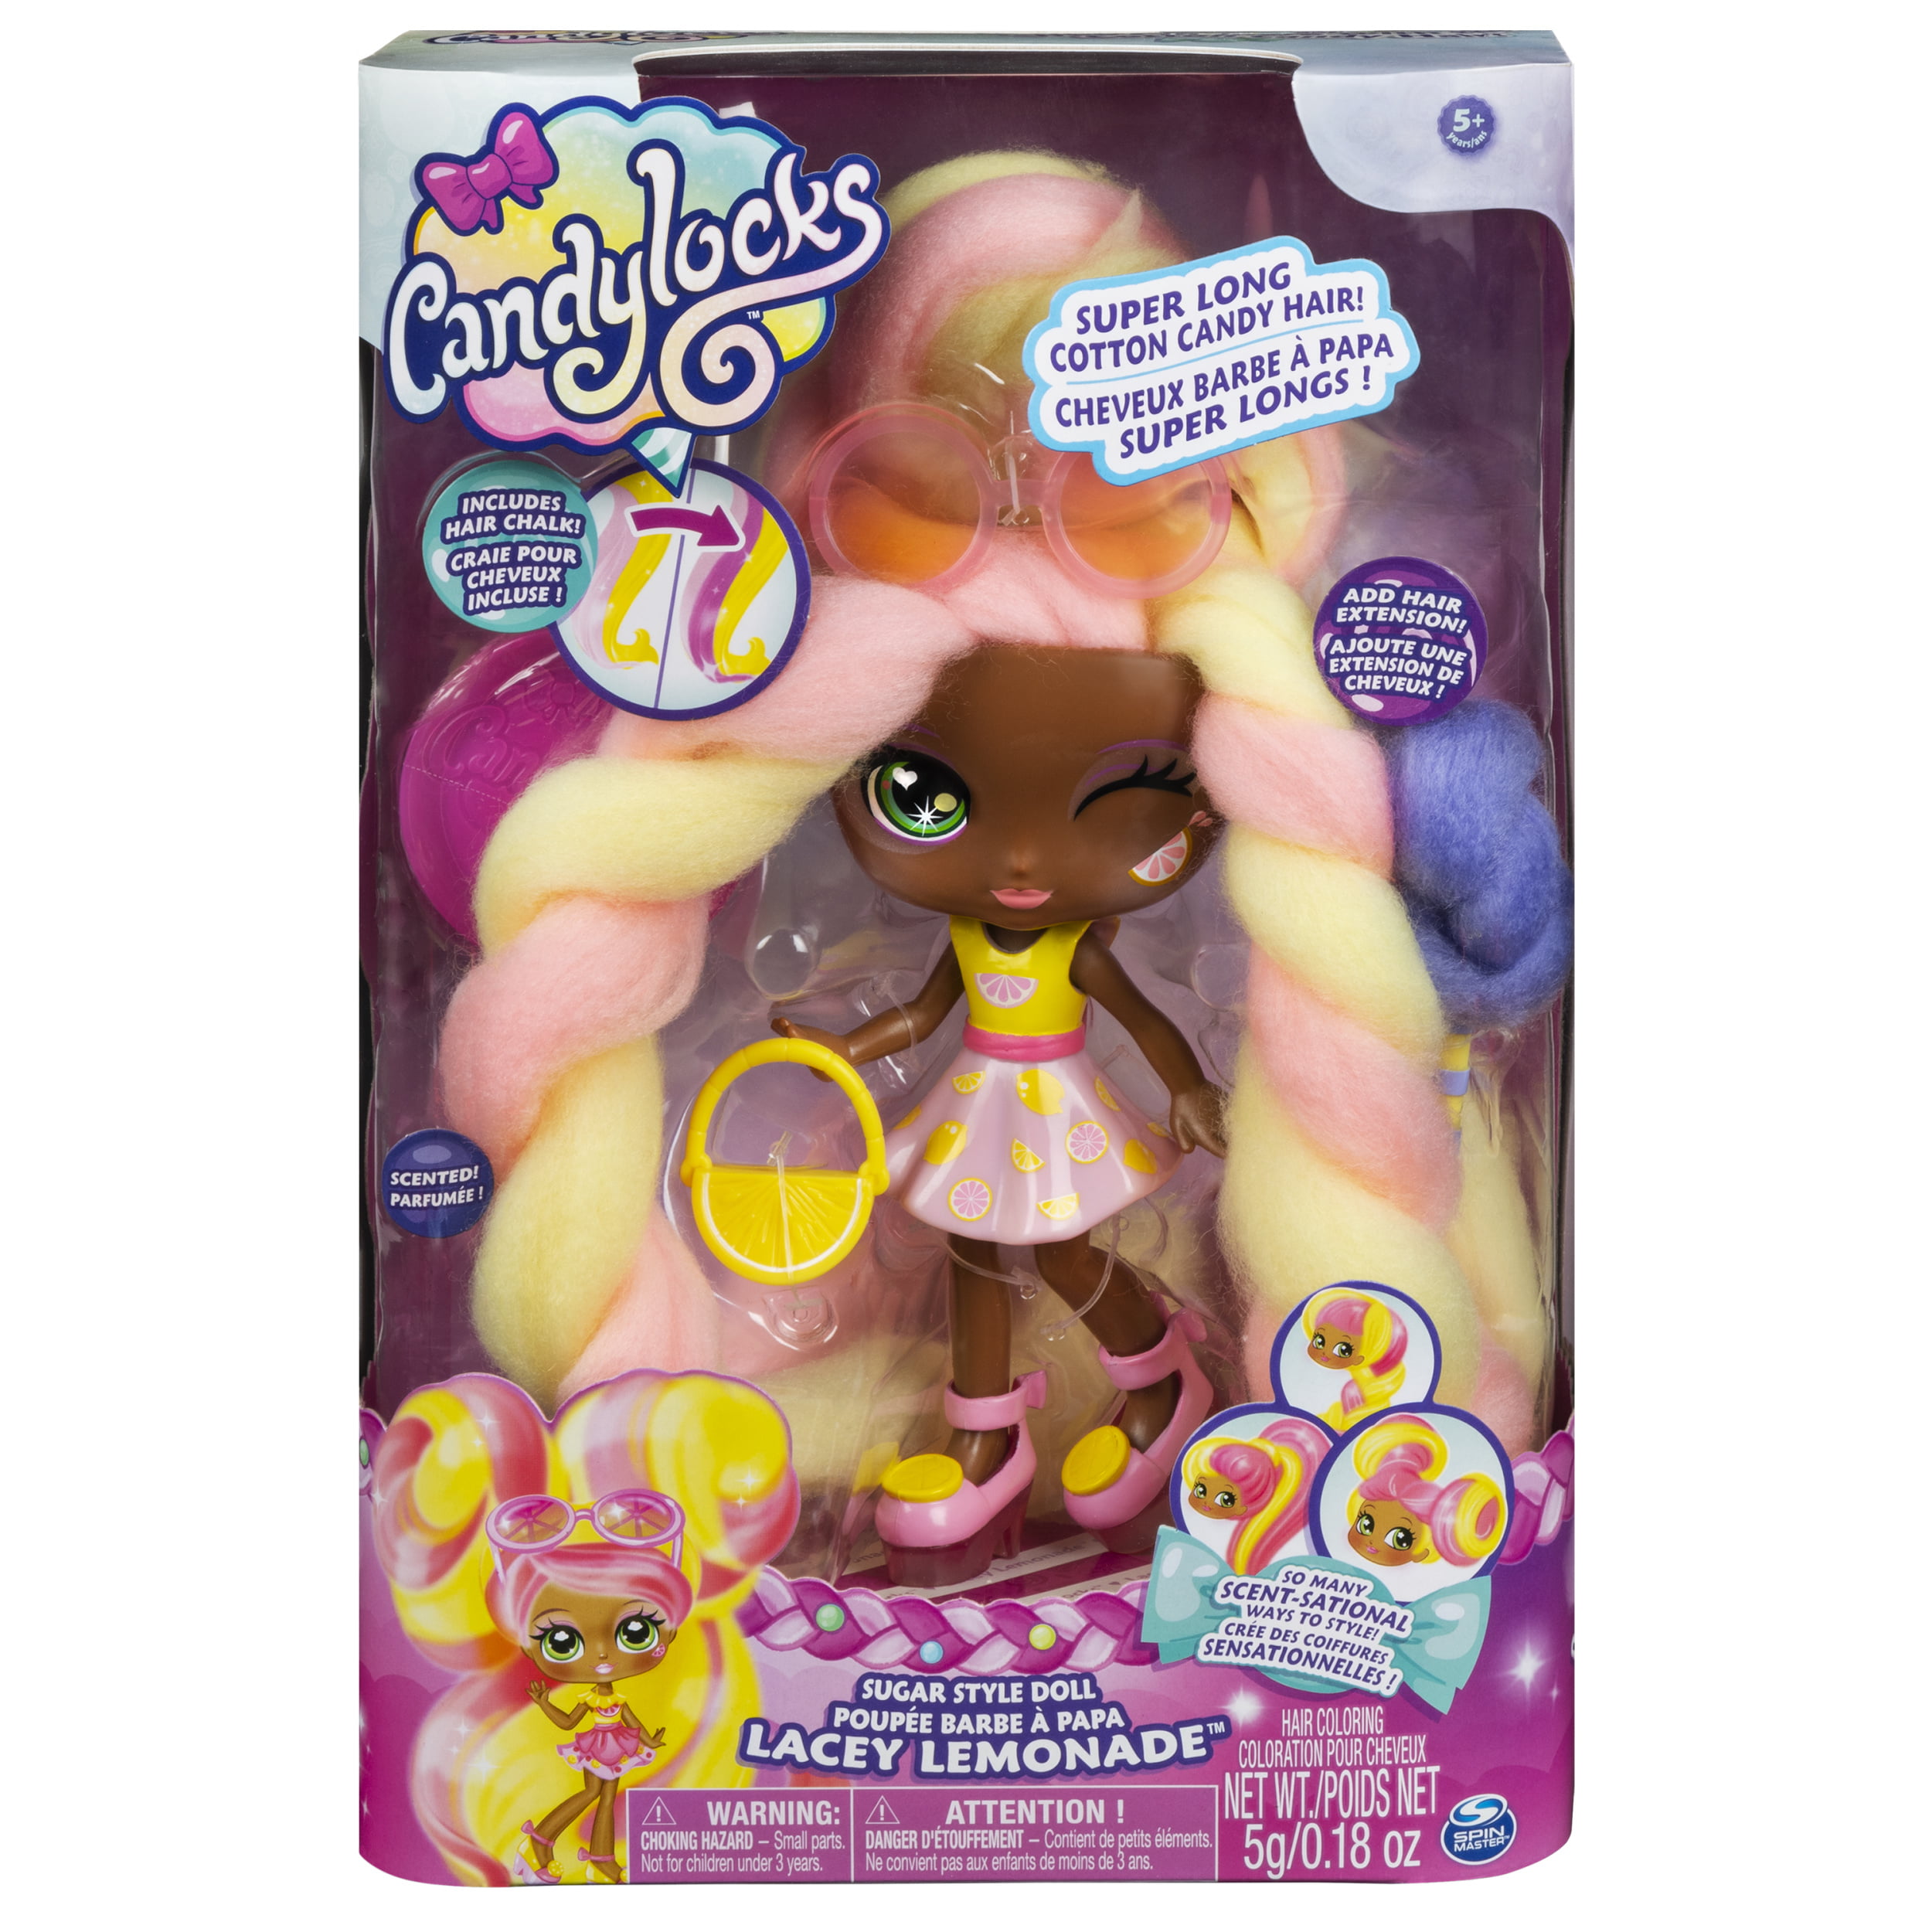 Candylocks 7 Inch Lacey Lemonade Sugar Style Deluxe Scented Collectible Doll With Accessories Walmart Com Walmart Com